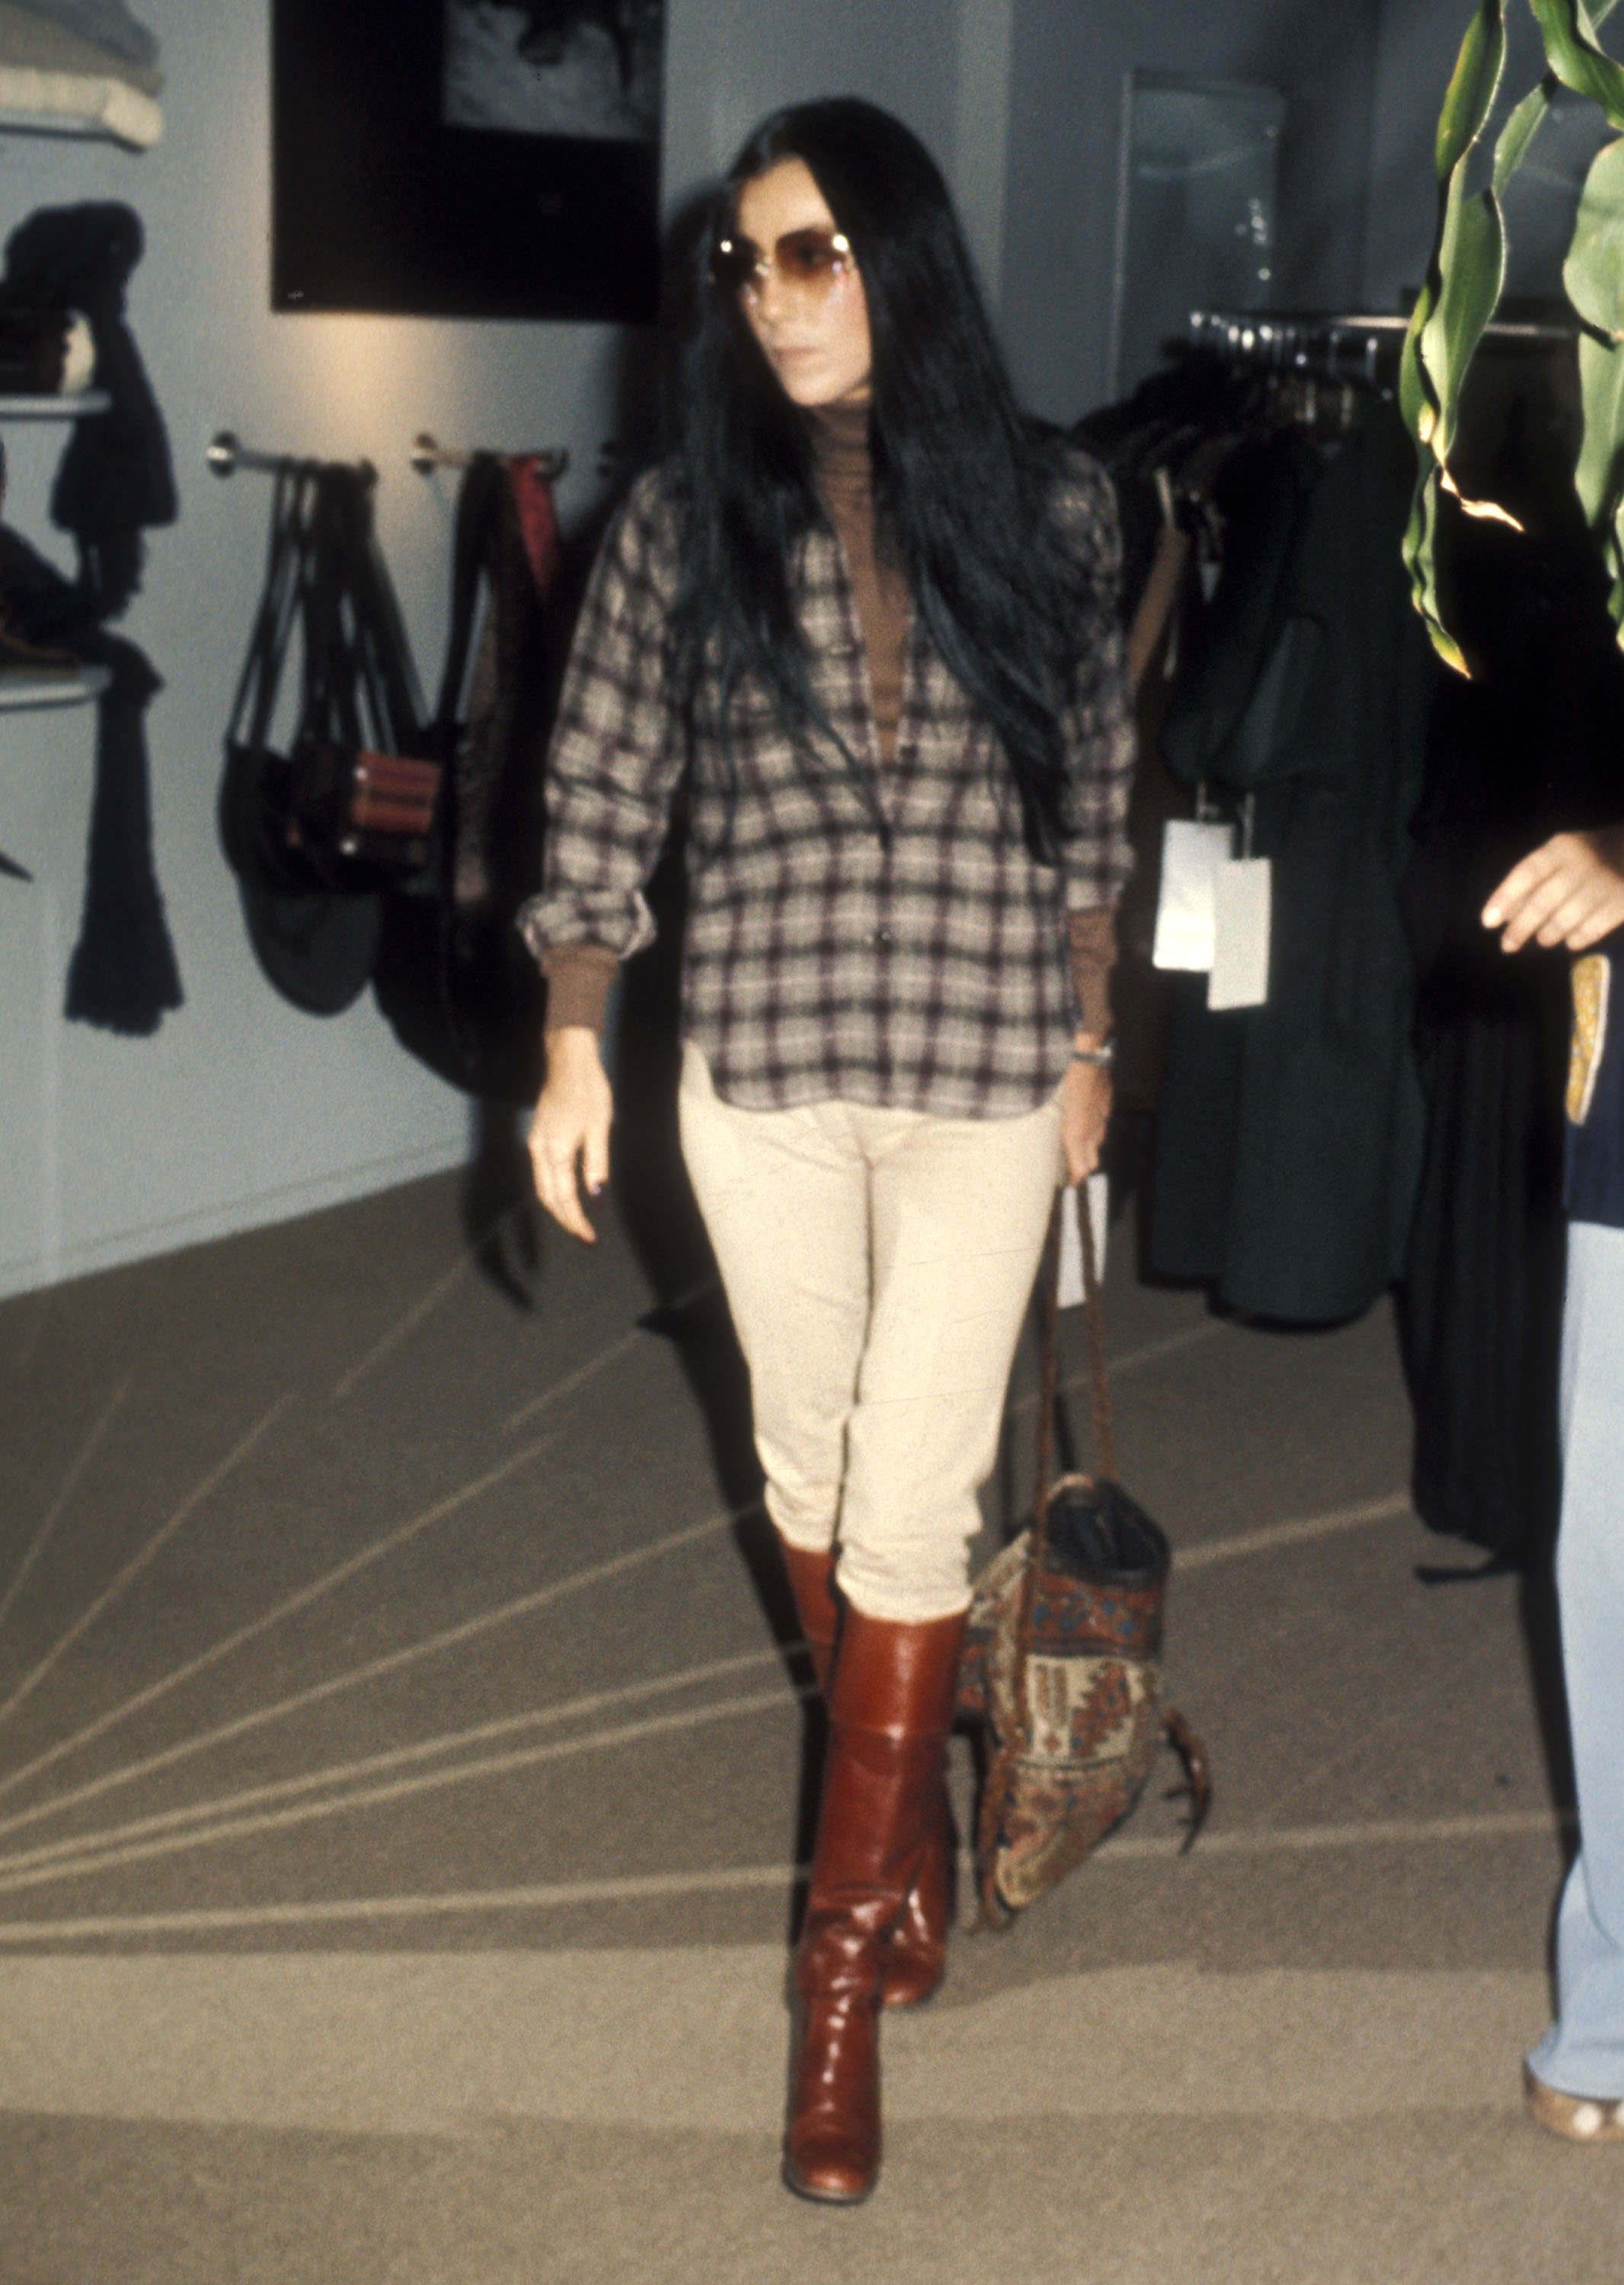 Cher and daughter Chasity Bono Shop on Madison Avenue